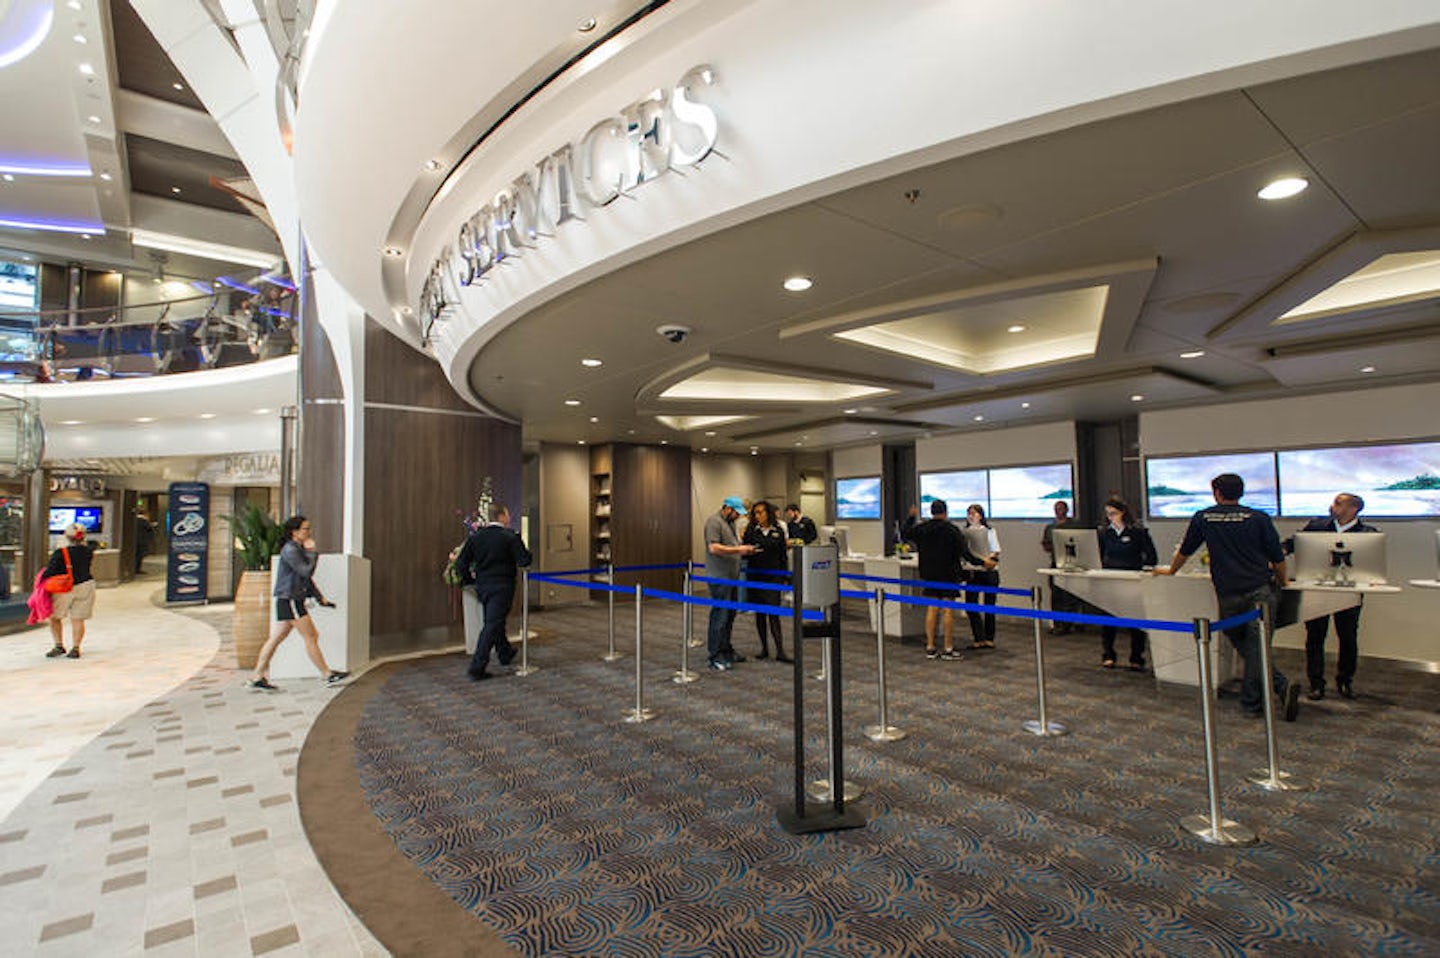 Guest Services on Harmony of the Seas